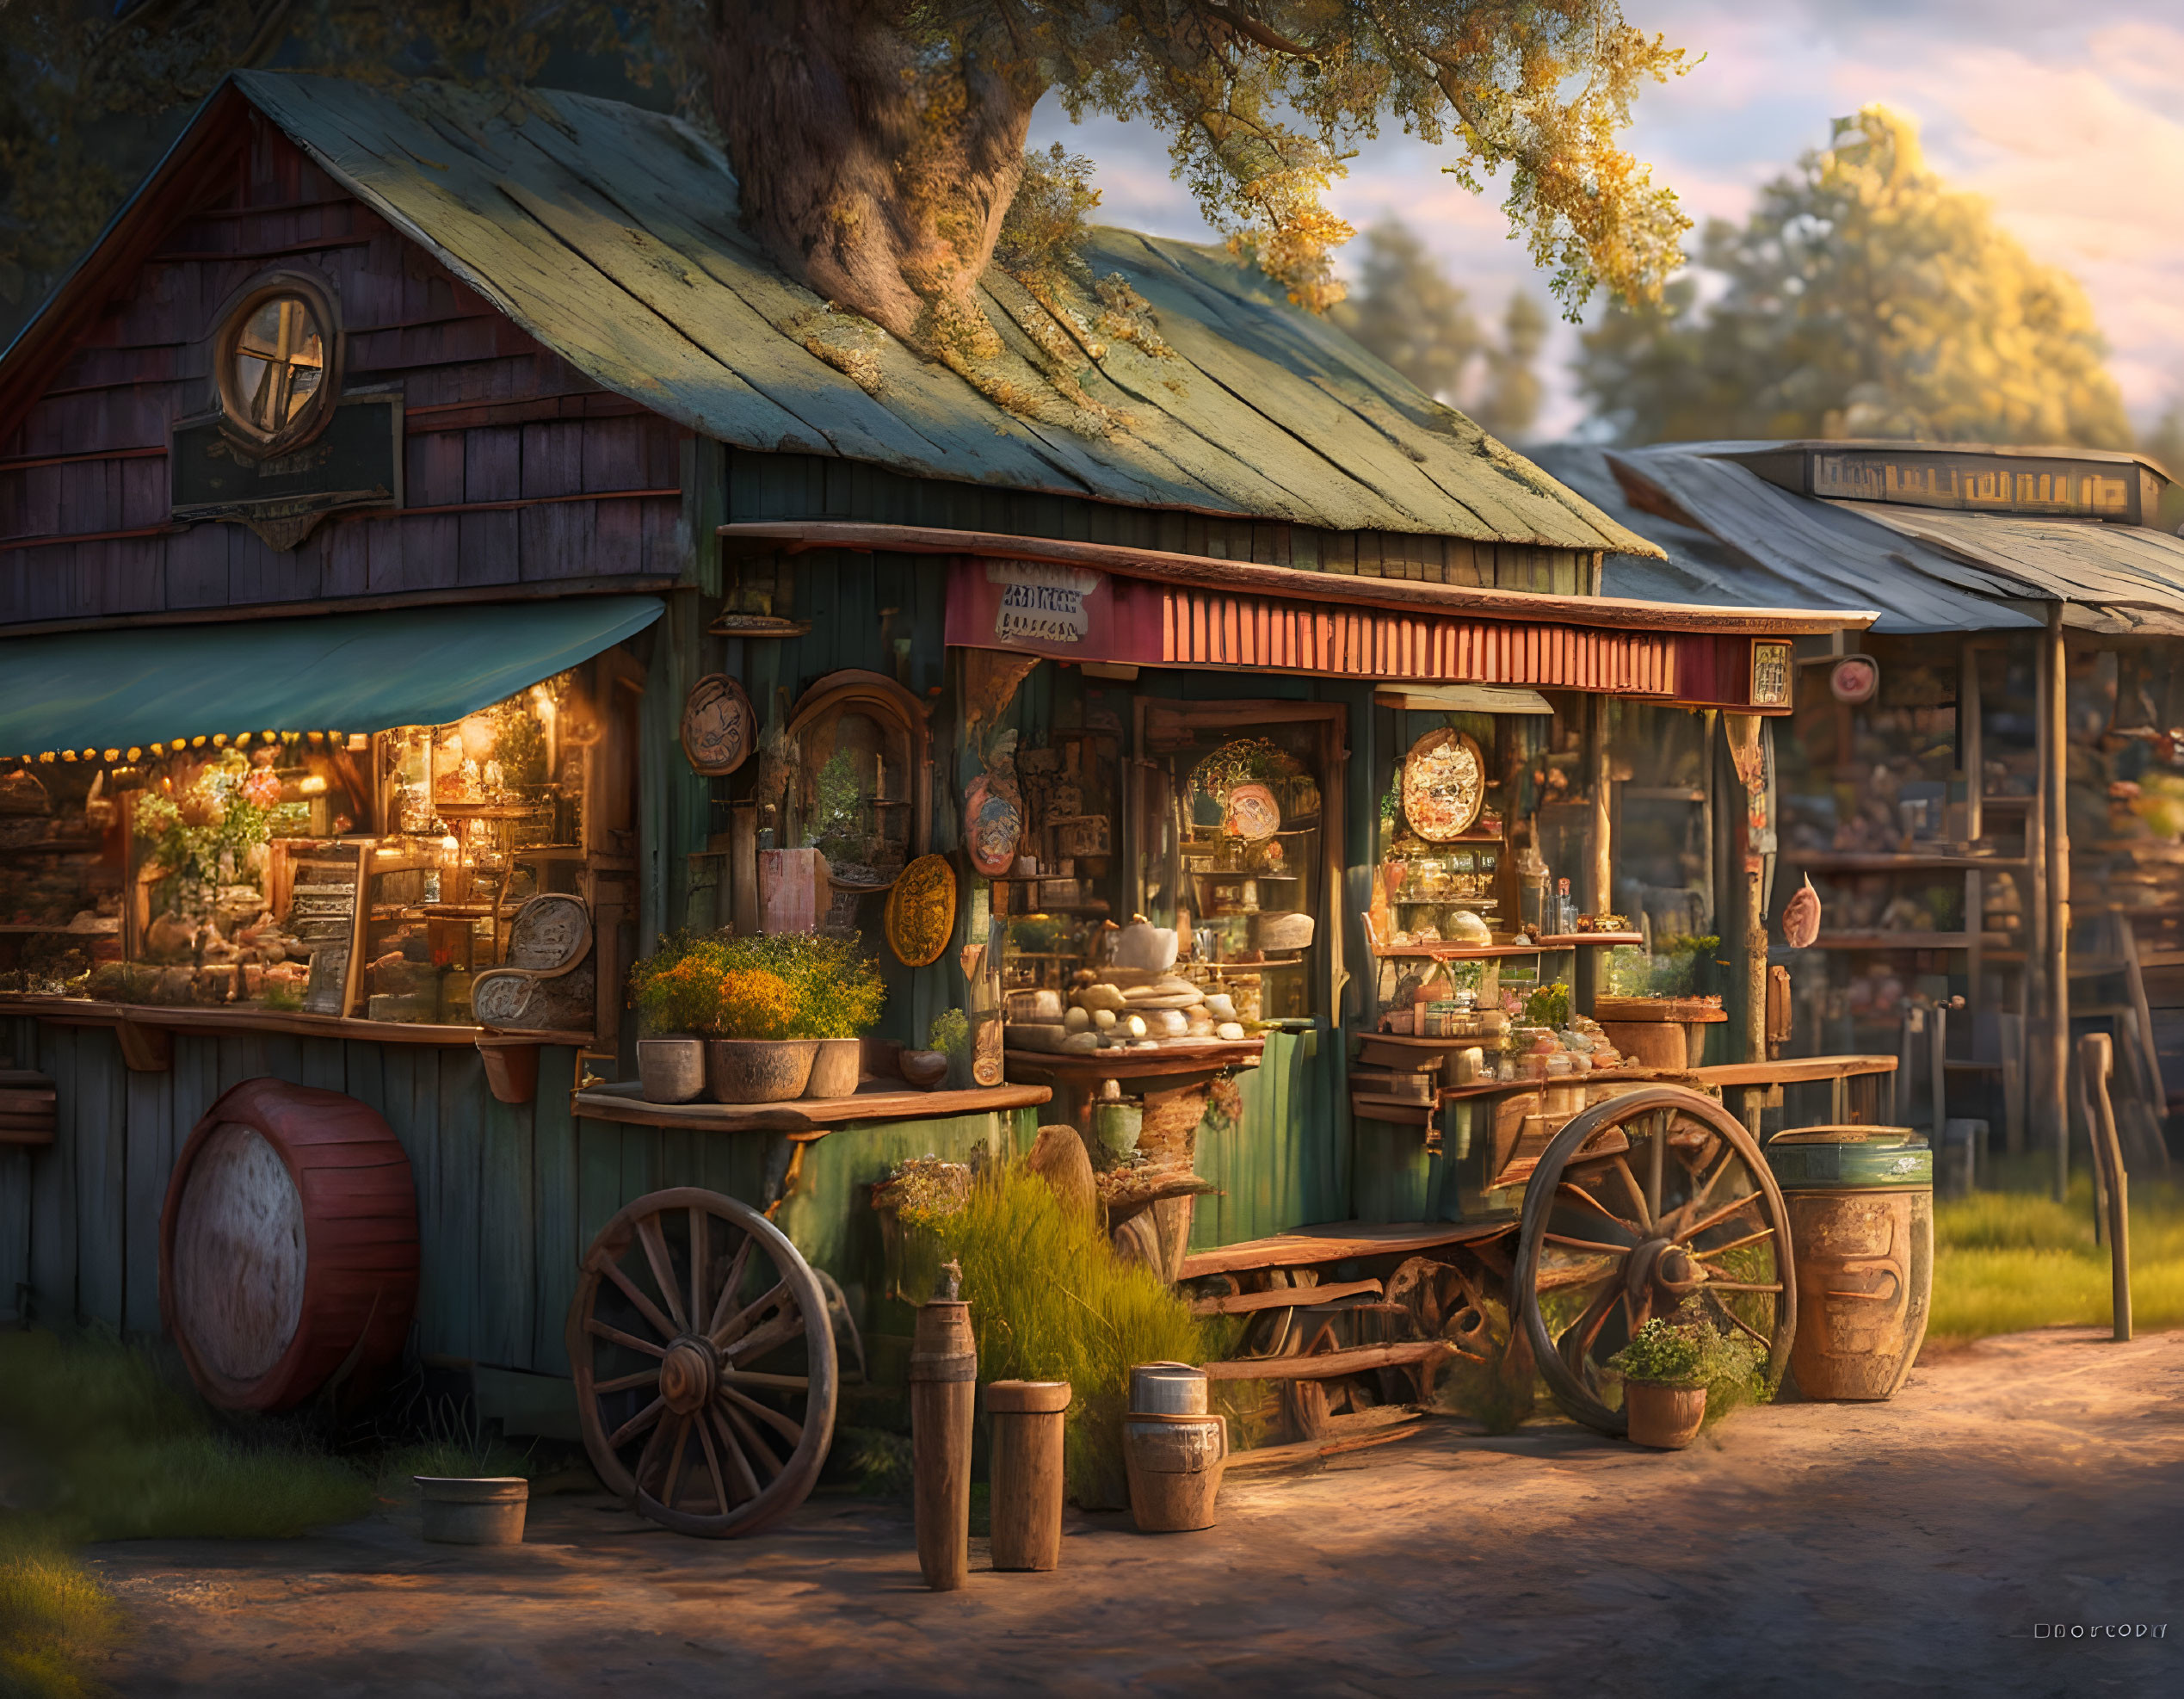 Whimsical Old General Store